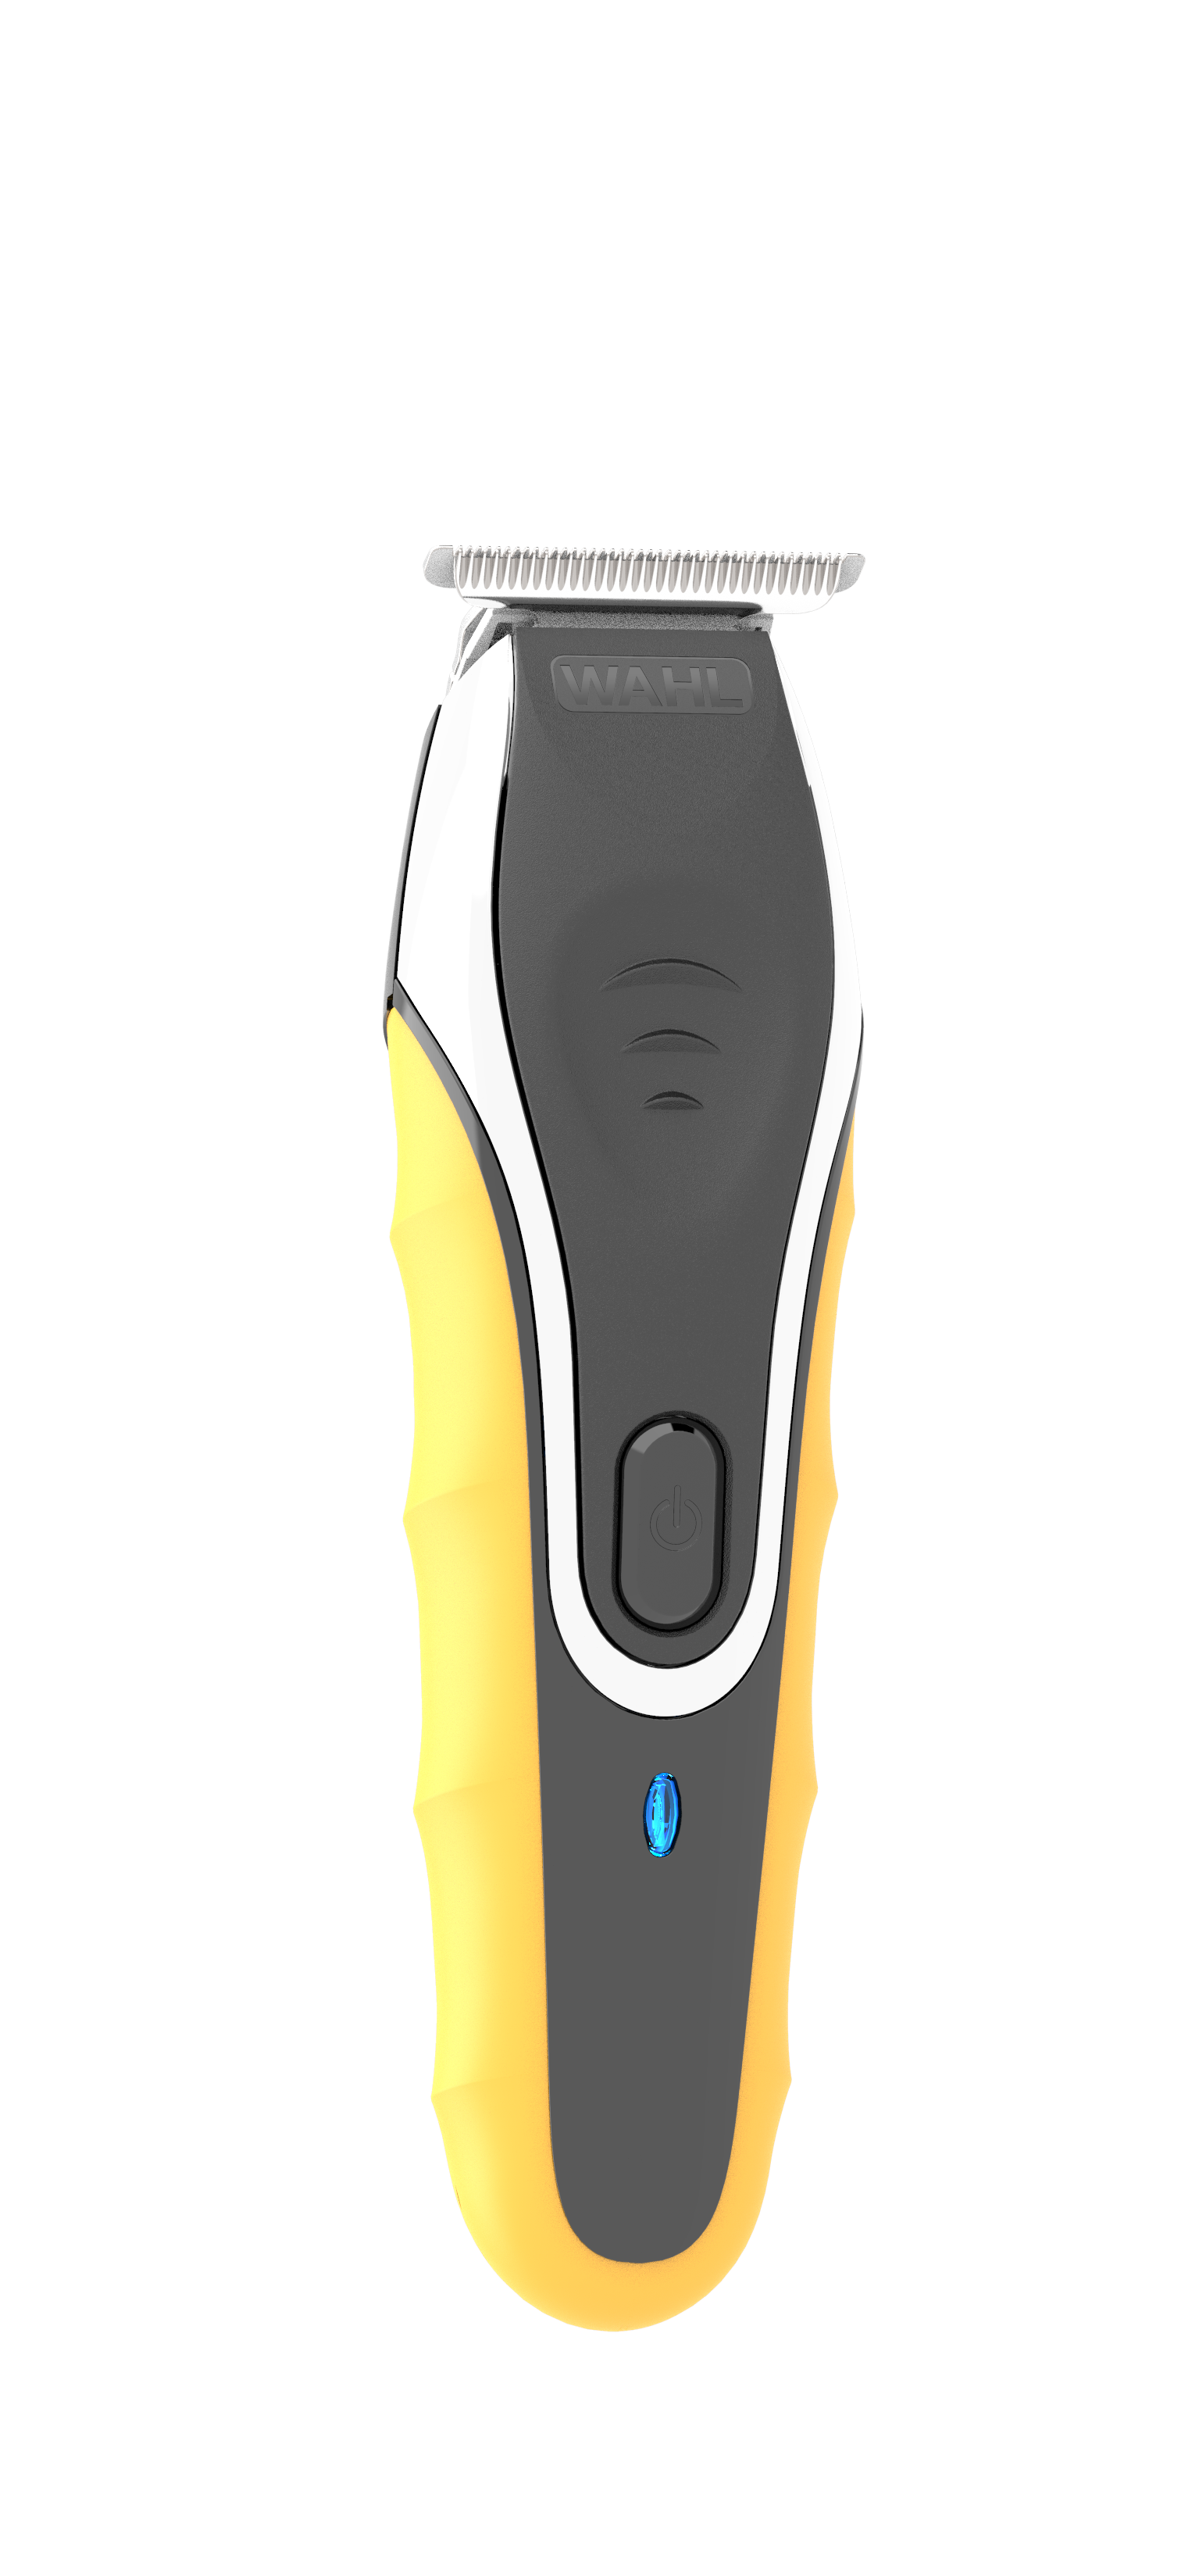 Wahl LifeProof Wet/Dry Lithium for Men, Black/Yellow, Trimmer Rechargeable Ion 9899